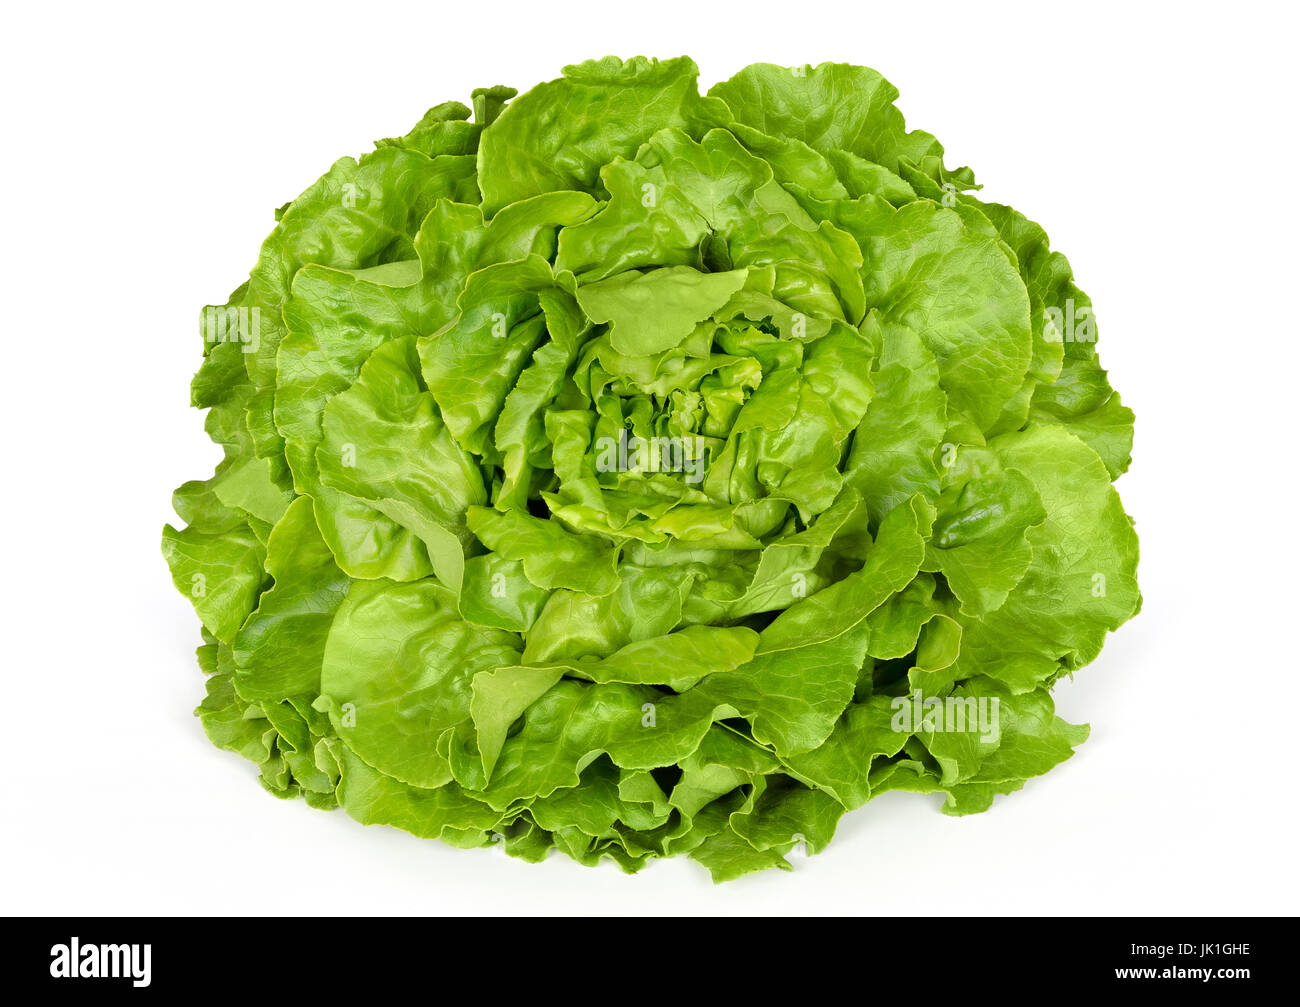 Butterhead lettuce front view. Also Boston or Bibb lettuce. Round lettuce. A green head salad with loose arrangement of leaves. Stock Photo